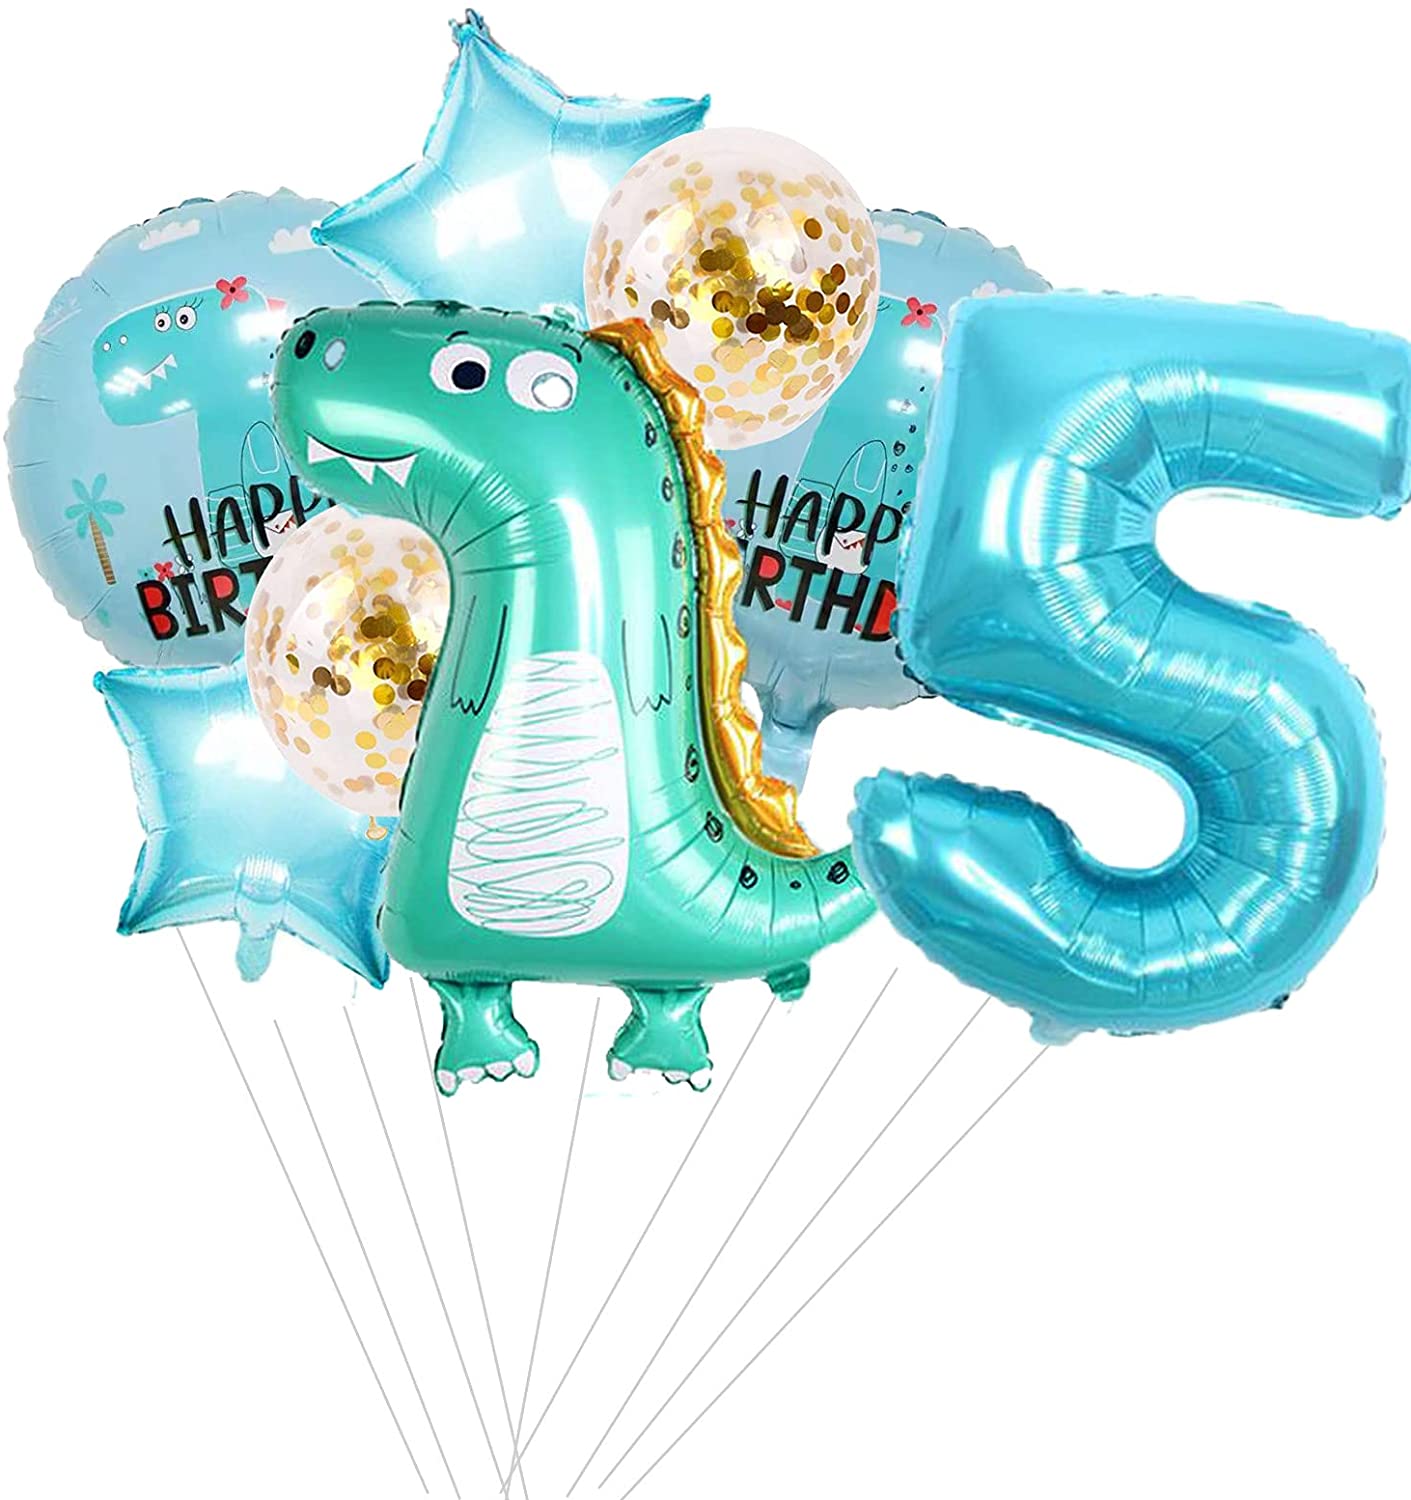 Dinosaur Balloon Bouquet 5th Birthday Party Supplies Decorations Favors 5 pc 